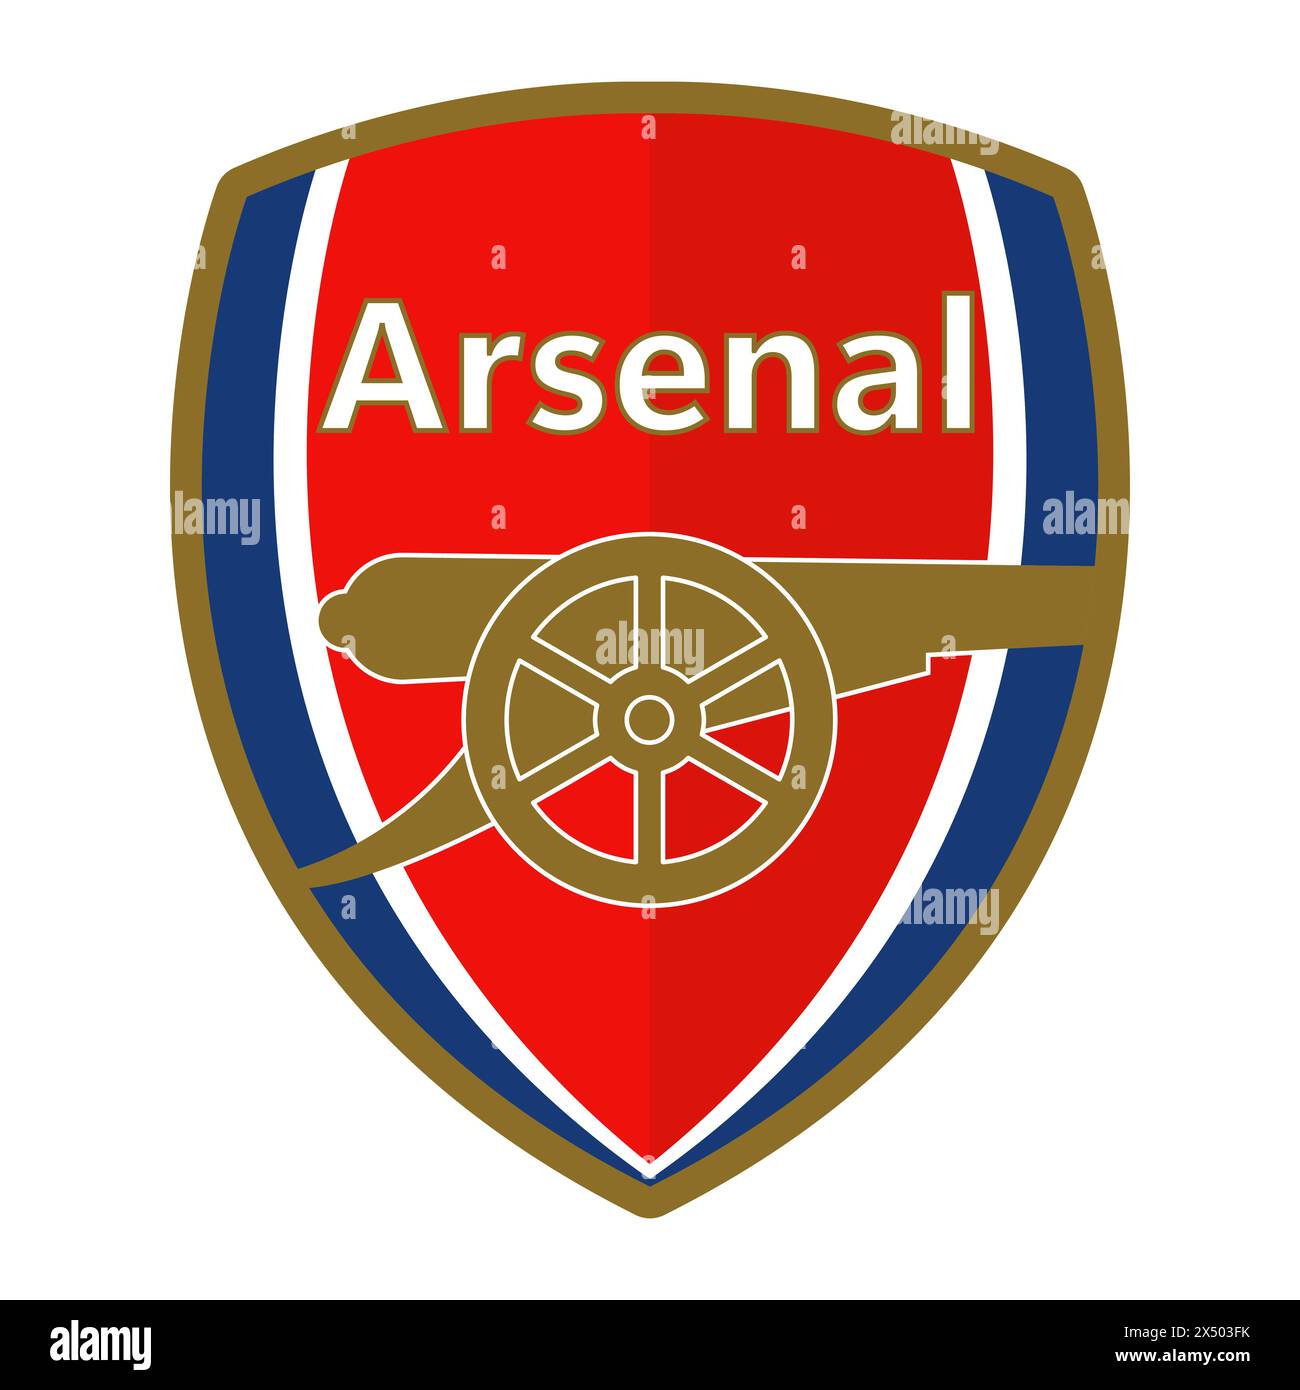 Arsenal FC emblem on classic red background. Historic football club, English Premier League, iconic cannon symbol. Editorial Stock Vector